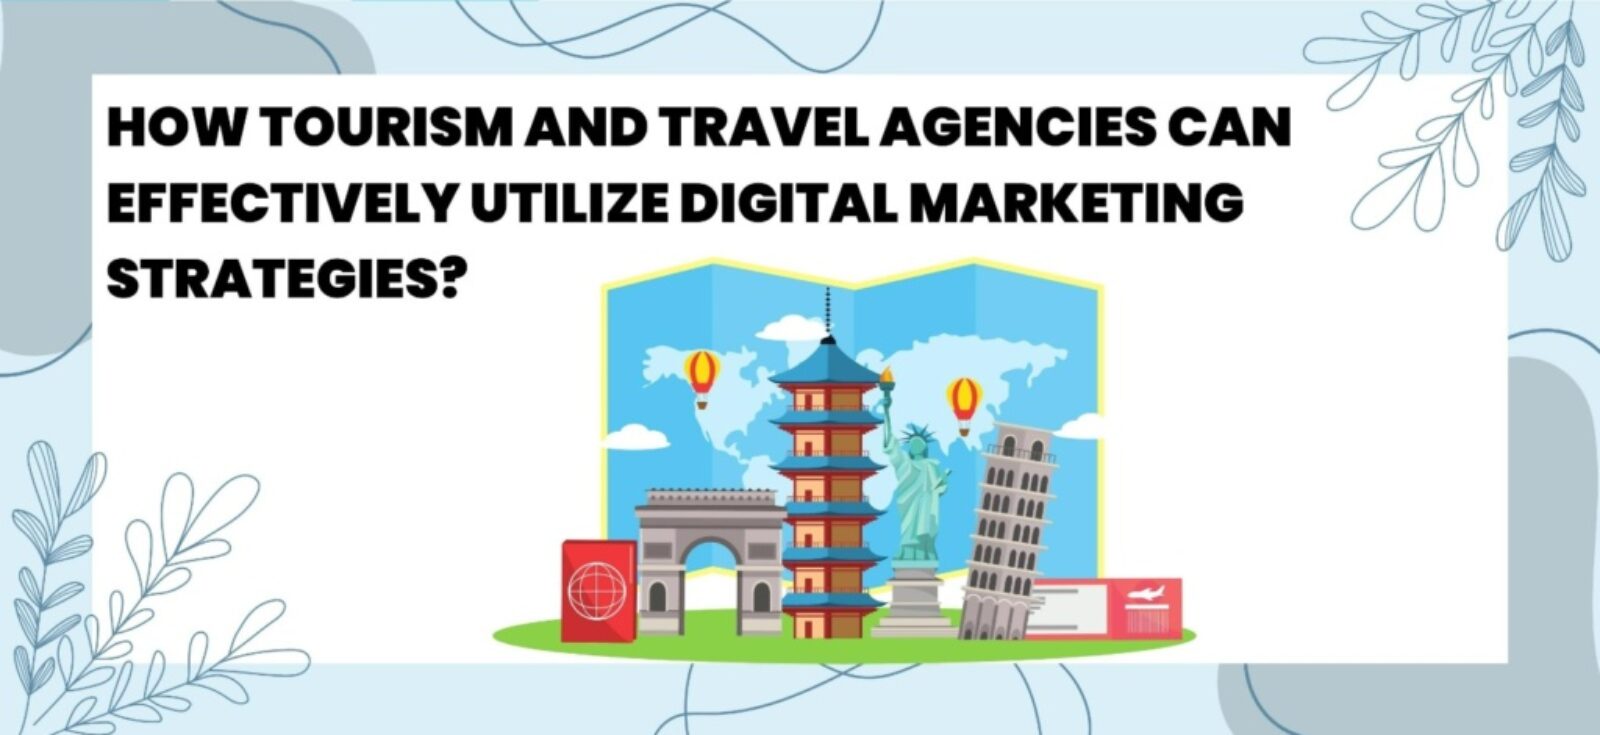 How Tourism and Travel Agencies Can Effectively Utilize Digital Marketing Strategies